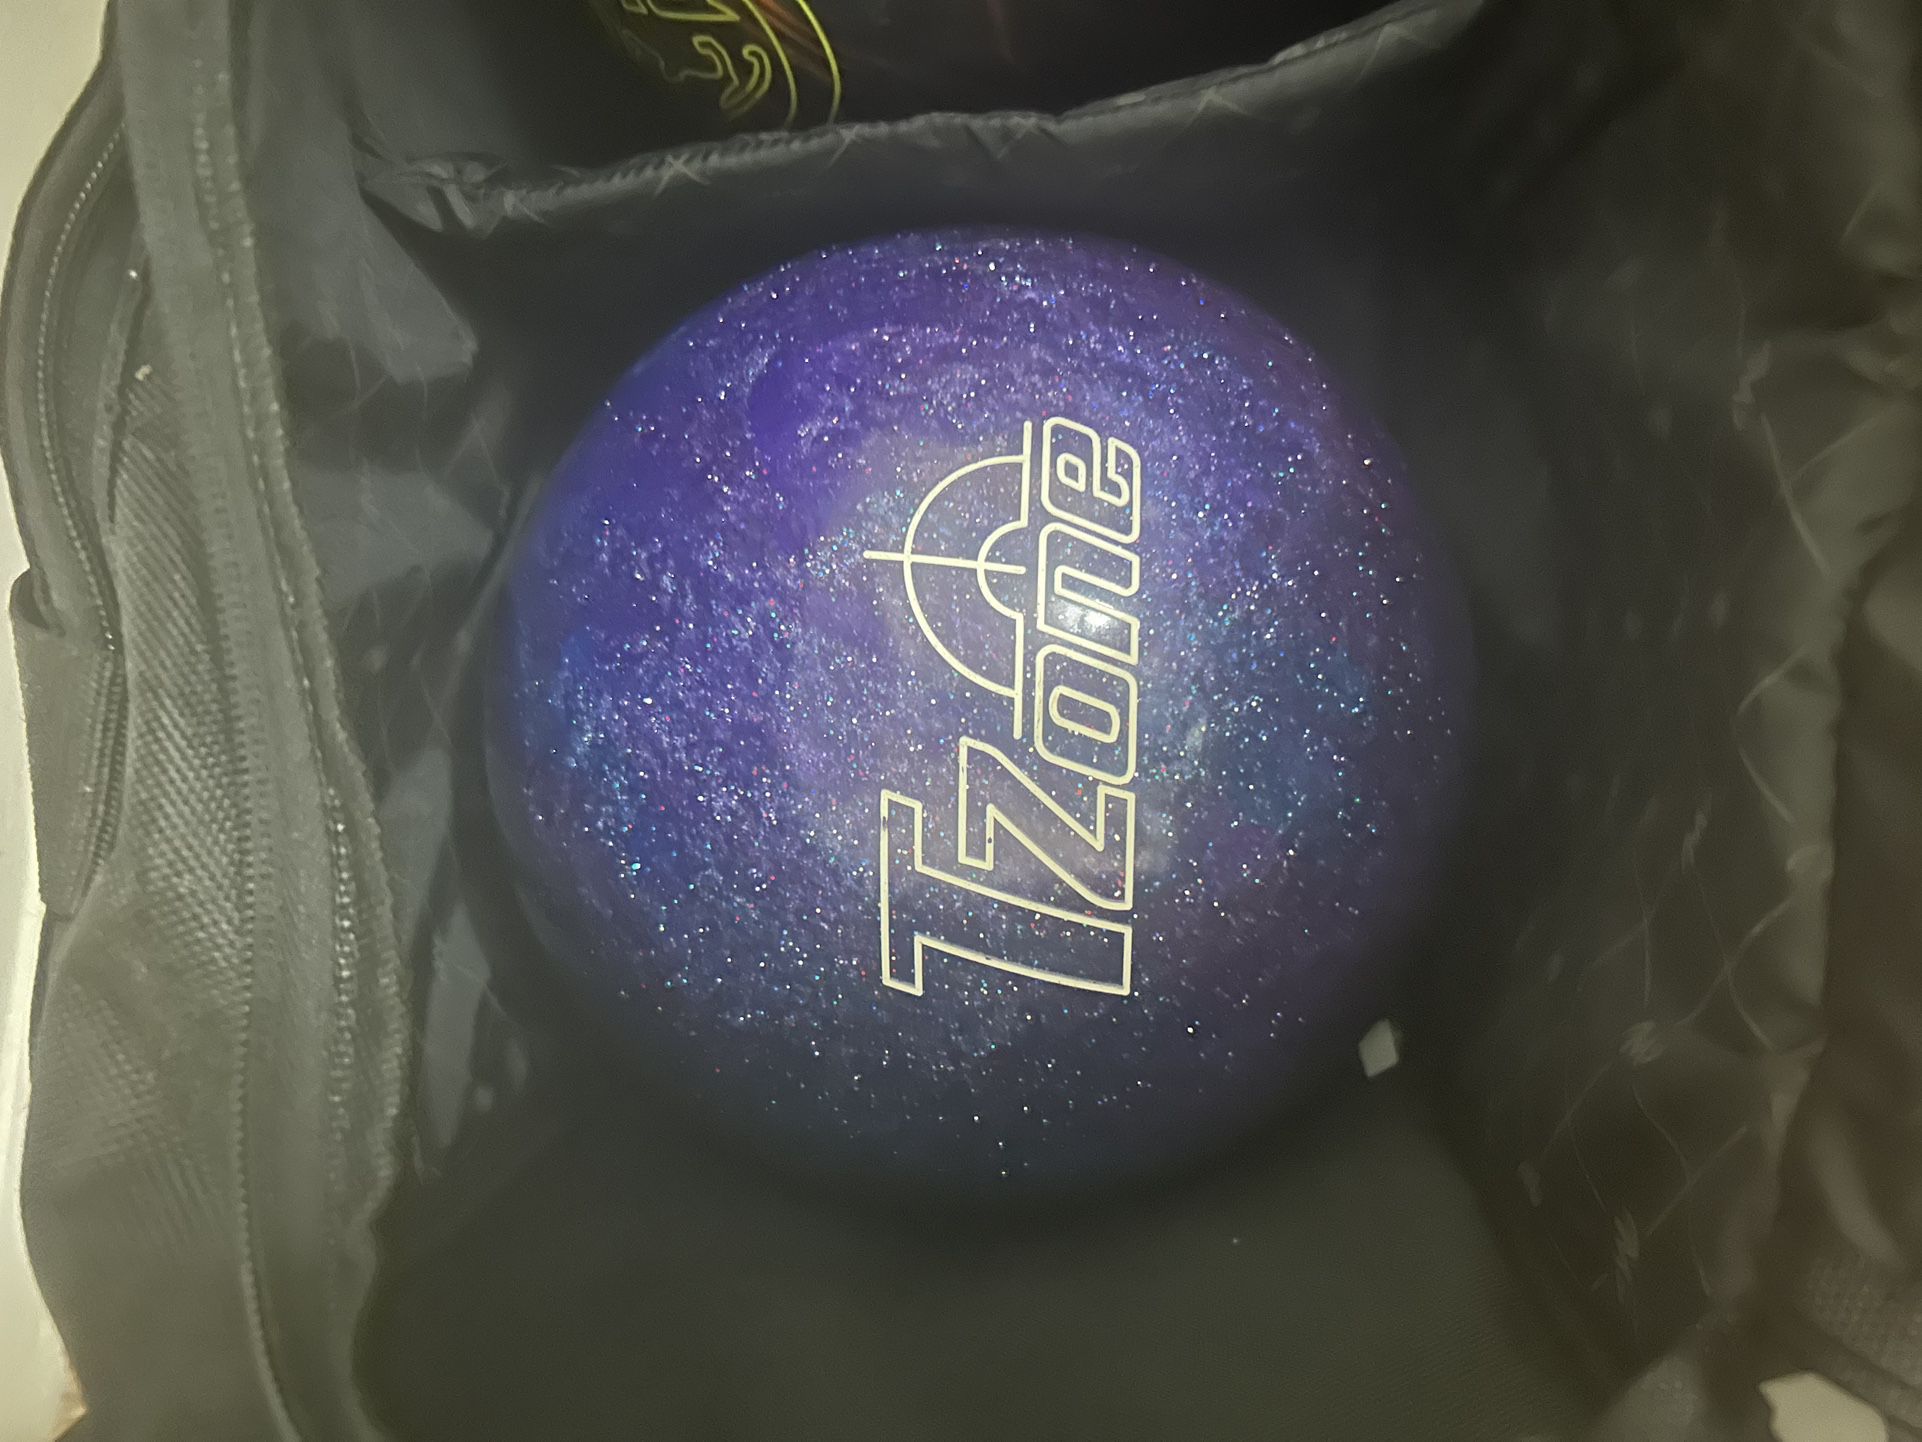 Bowling Balls For Sale